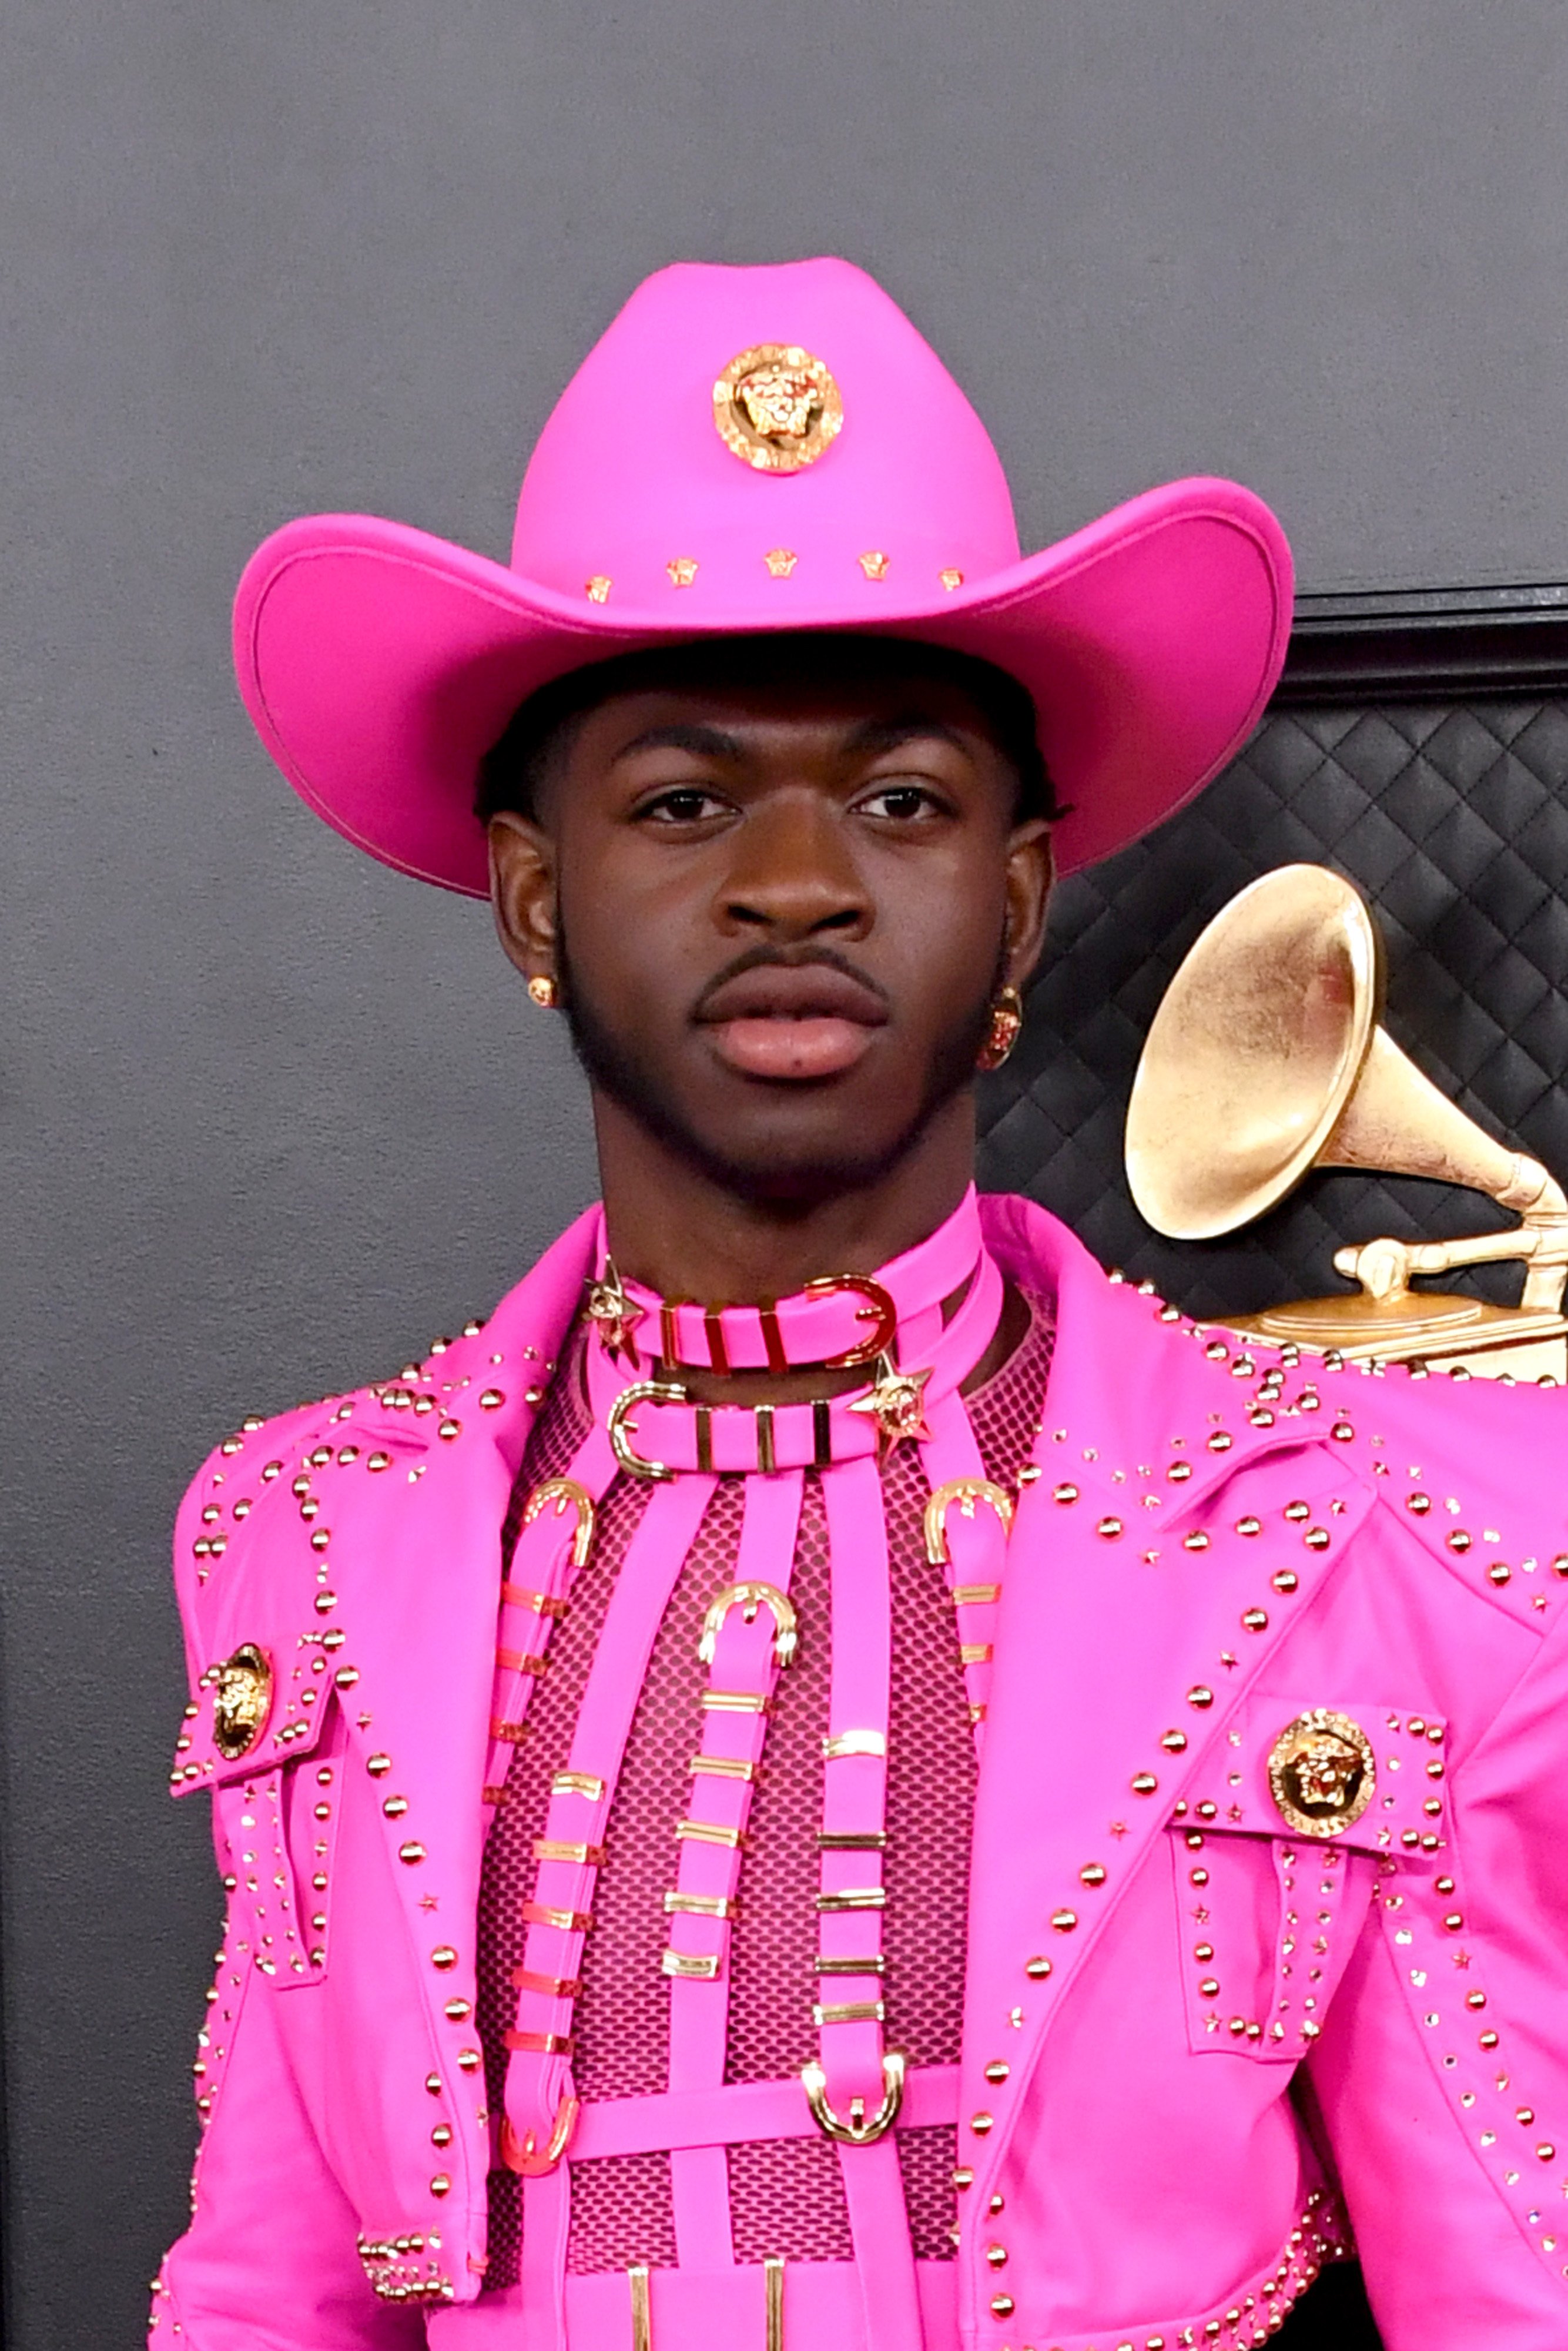 'Old Town Road' Rapper Lil Nas X Buys His First Home at Age 21 — Take a